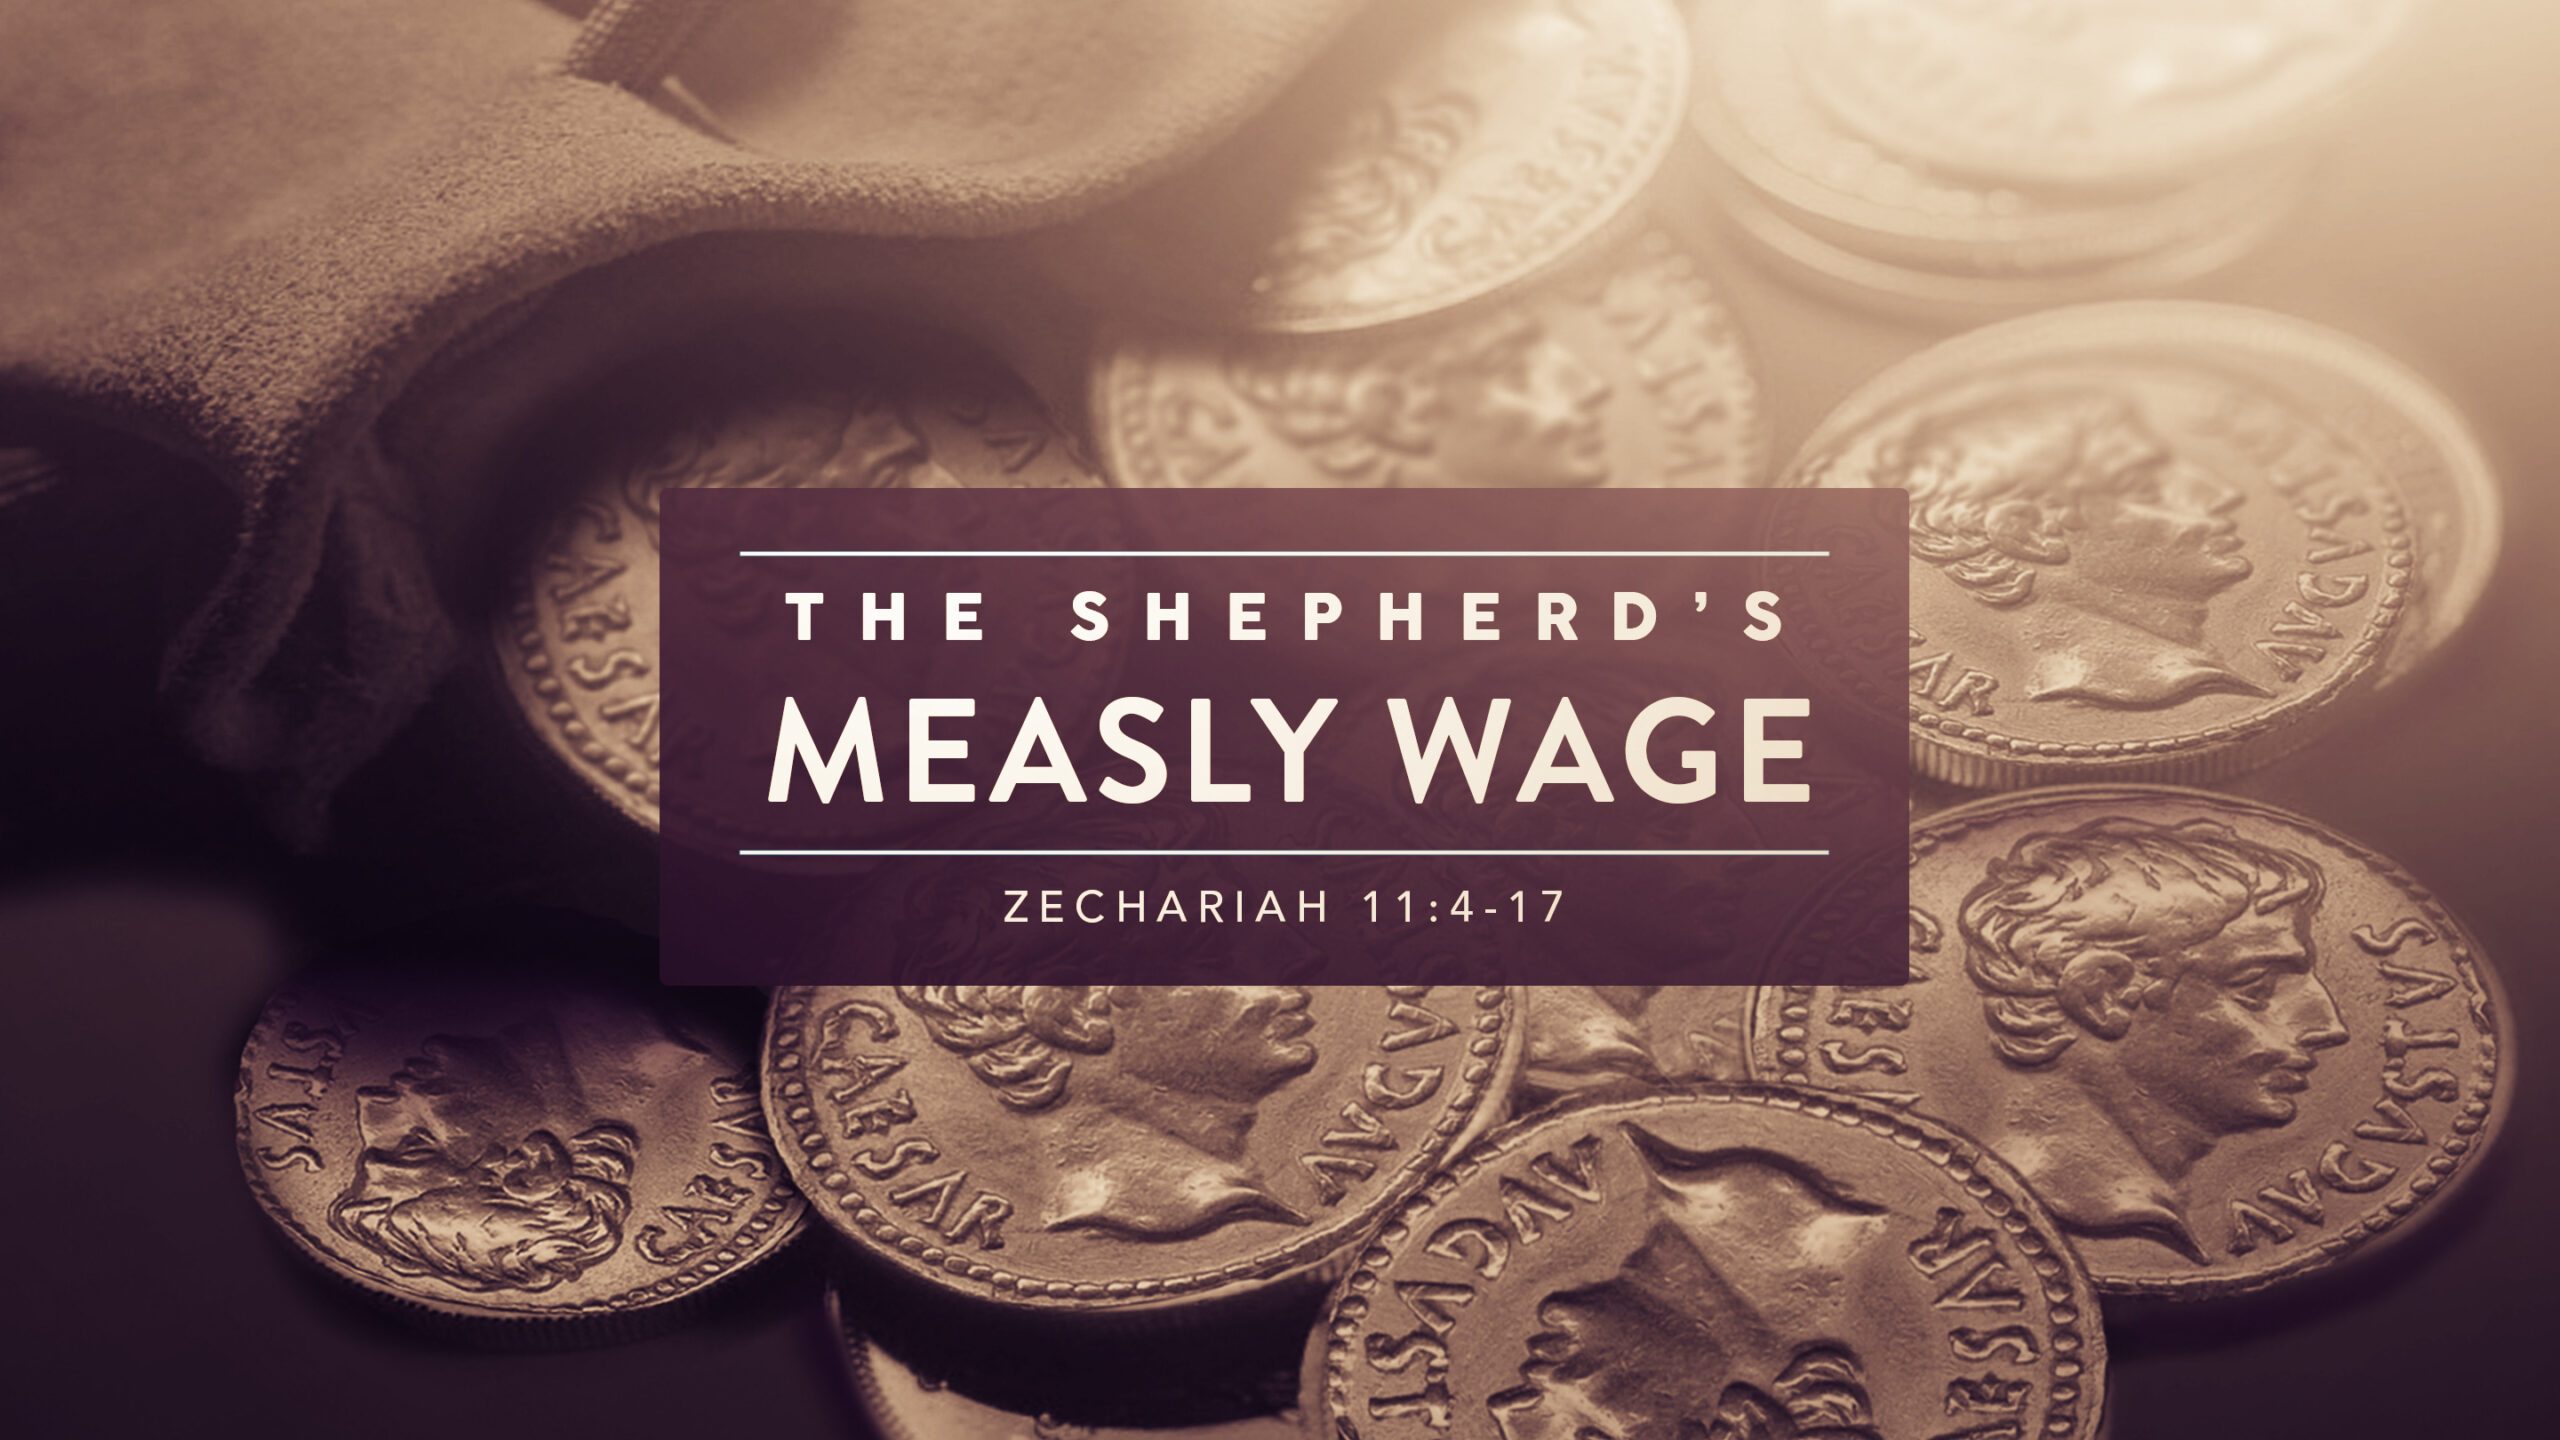 The Sheperd's Measly Wage Image